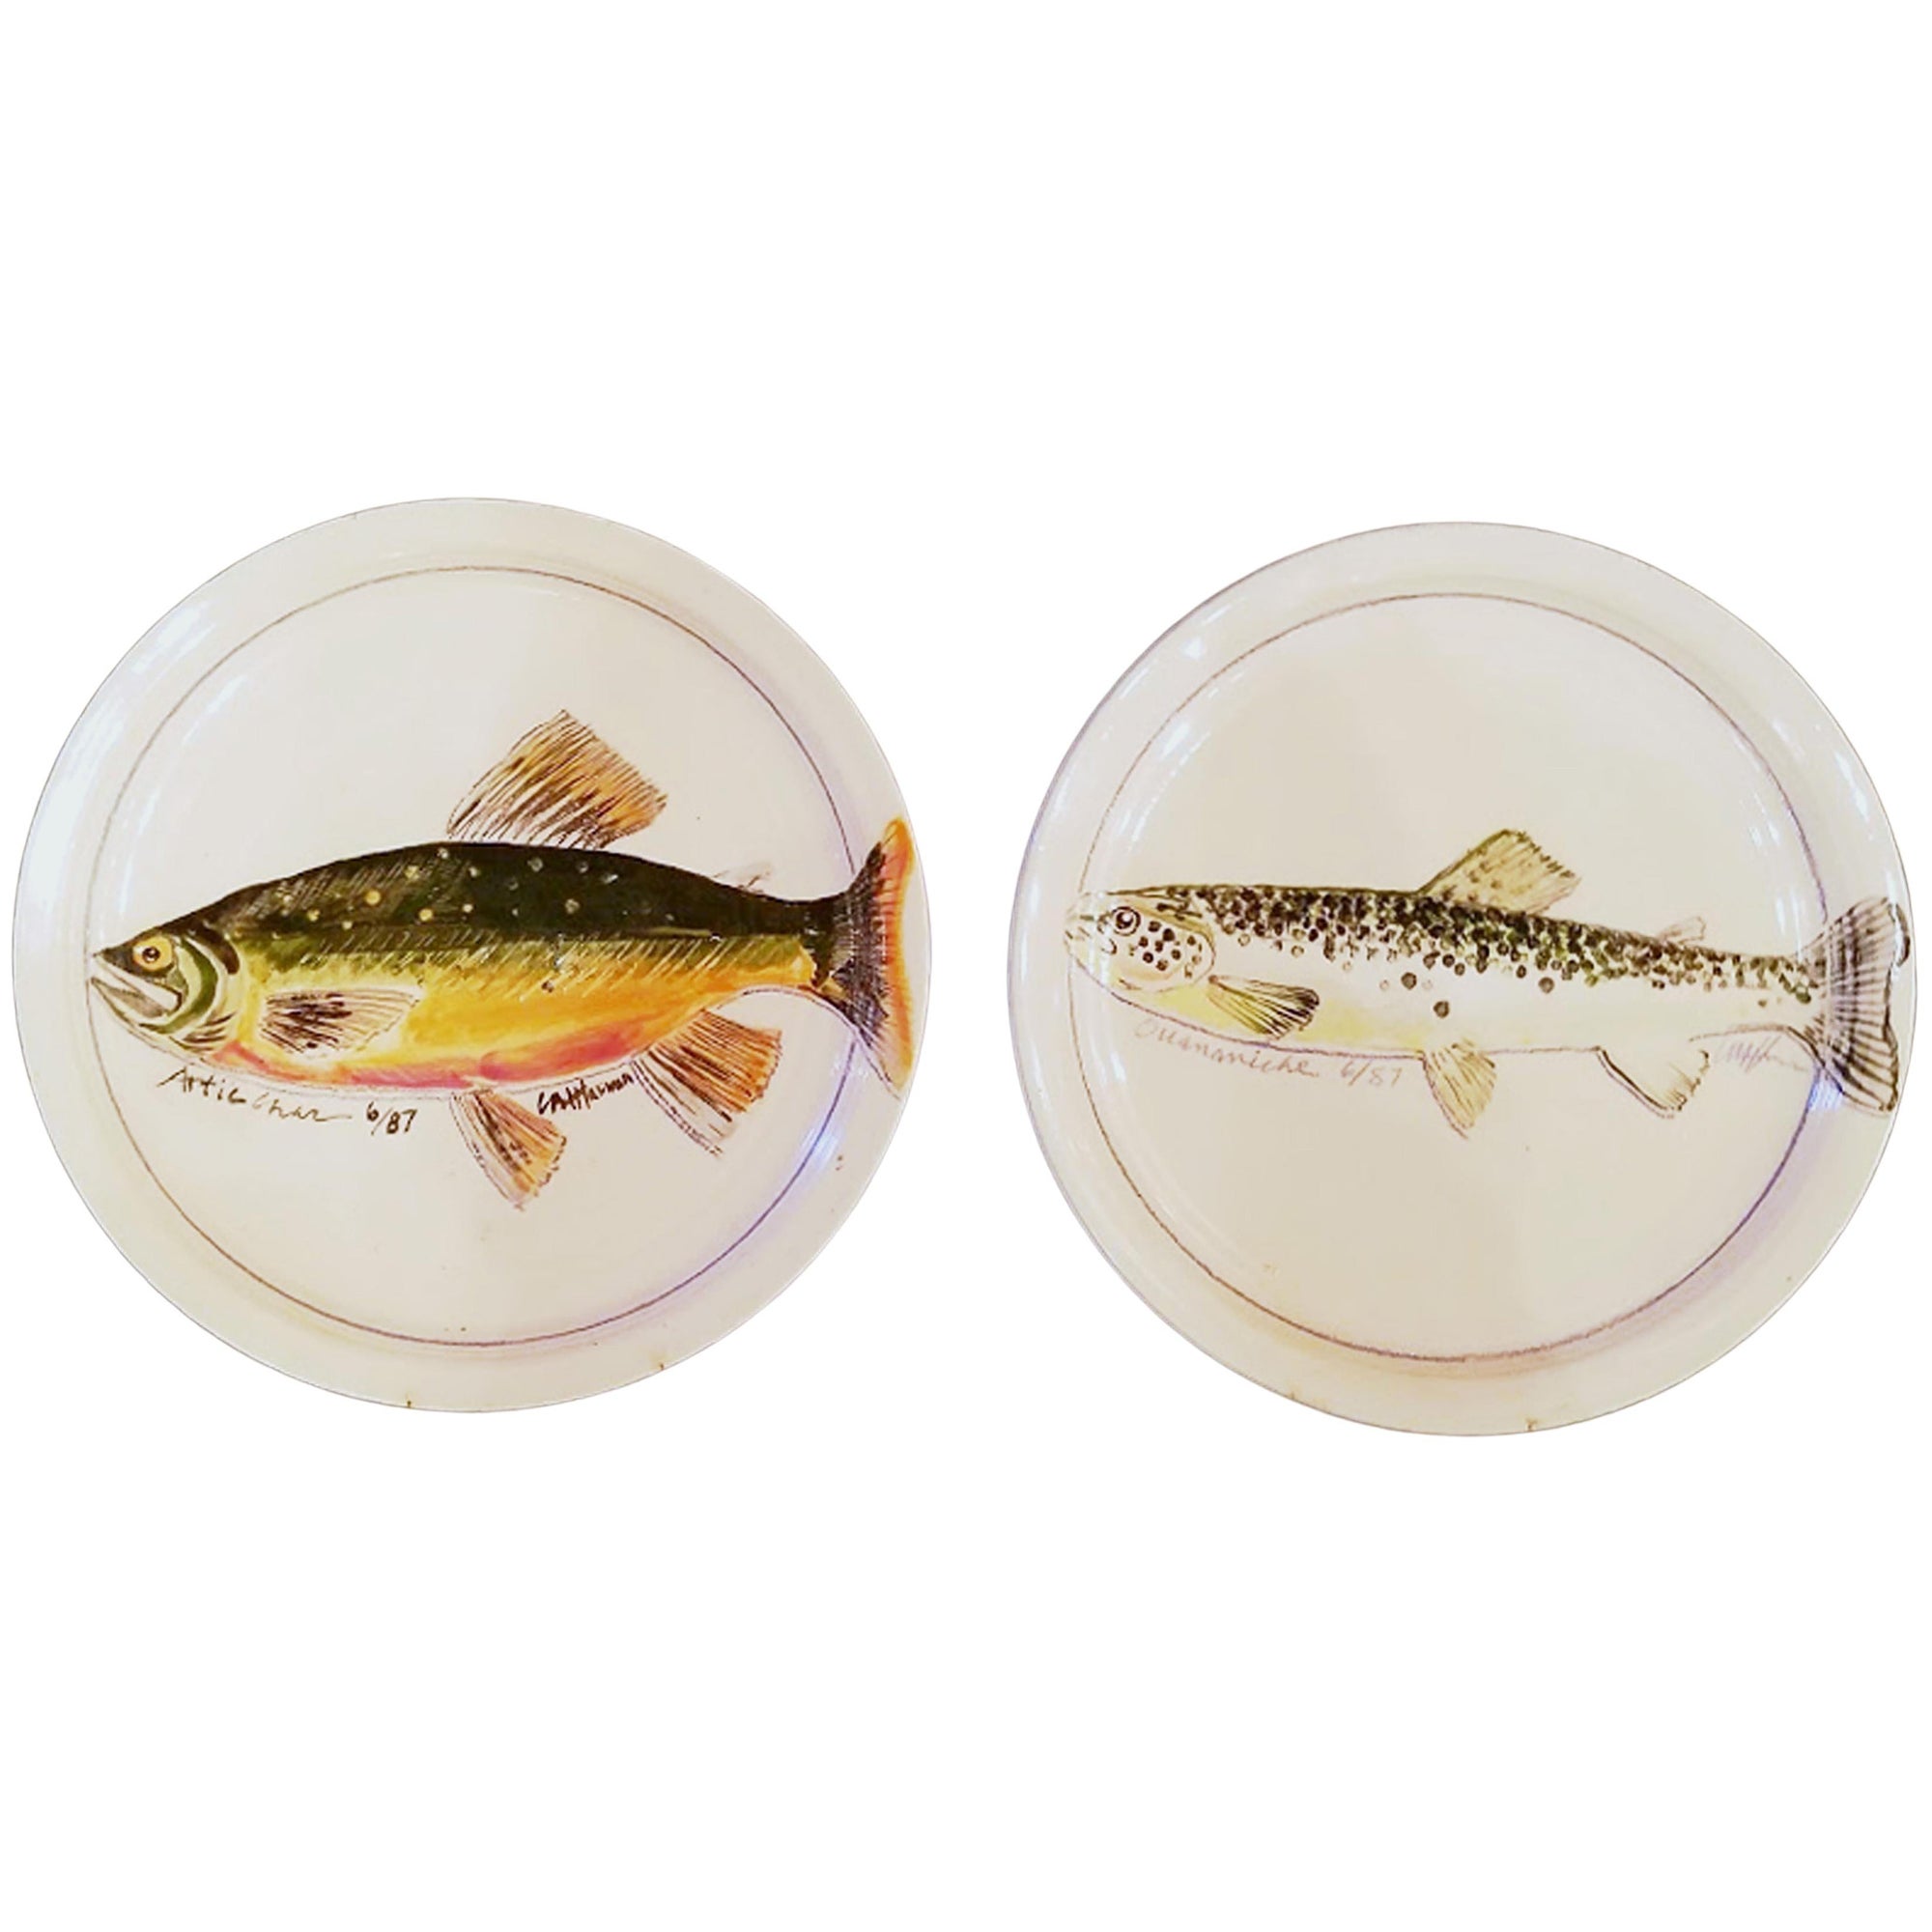 Carole Harman Ceramic Dishes Painted with Fish, Arctic Char & Ouananiche Salmon